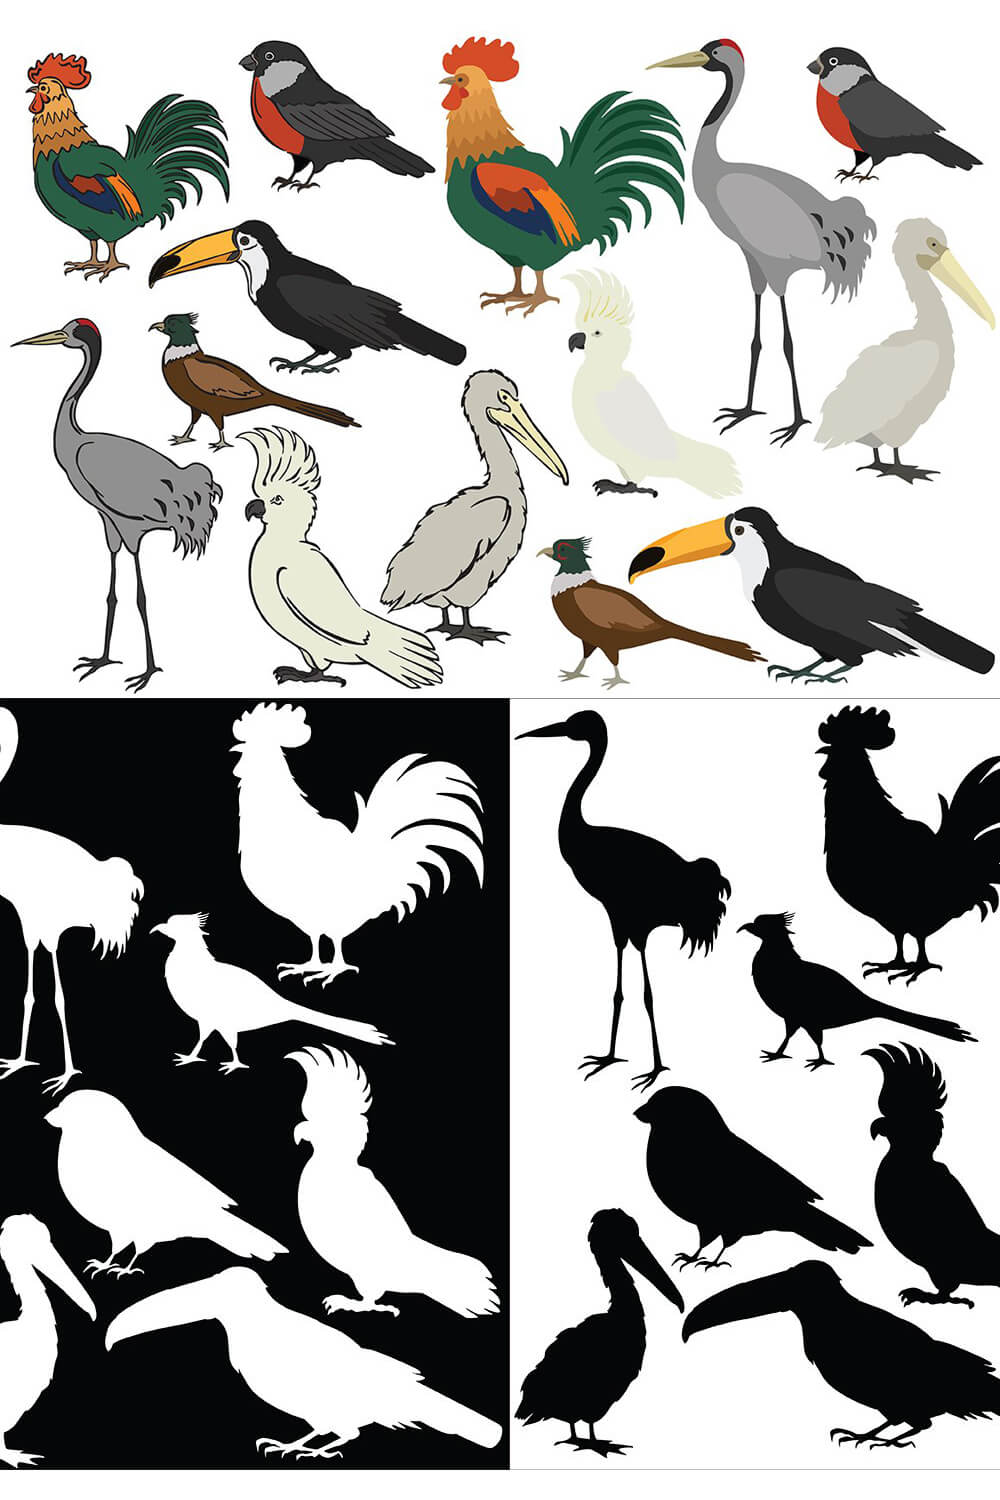 Cluster of three types of vector drawings of birds: in color, white on black and black on white.